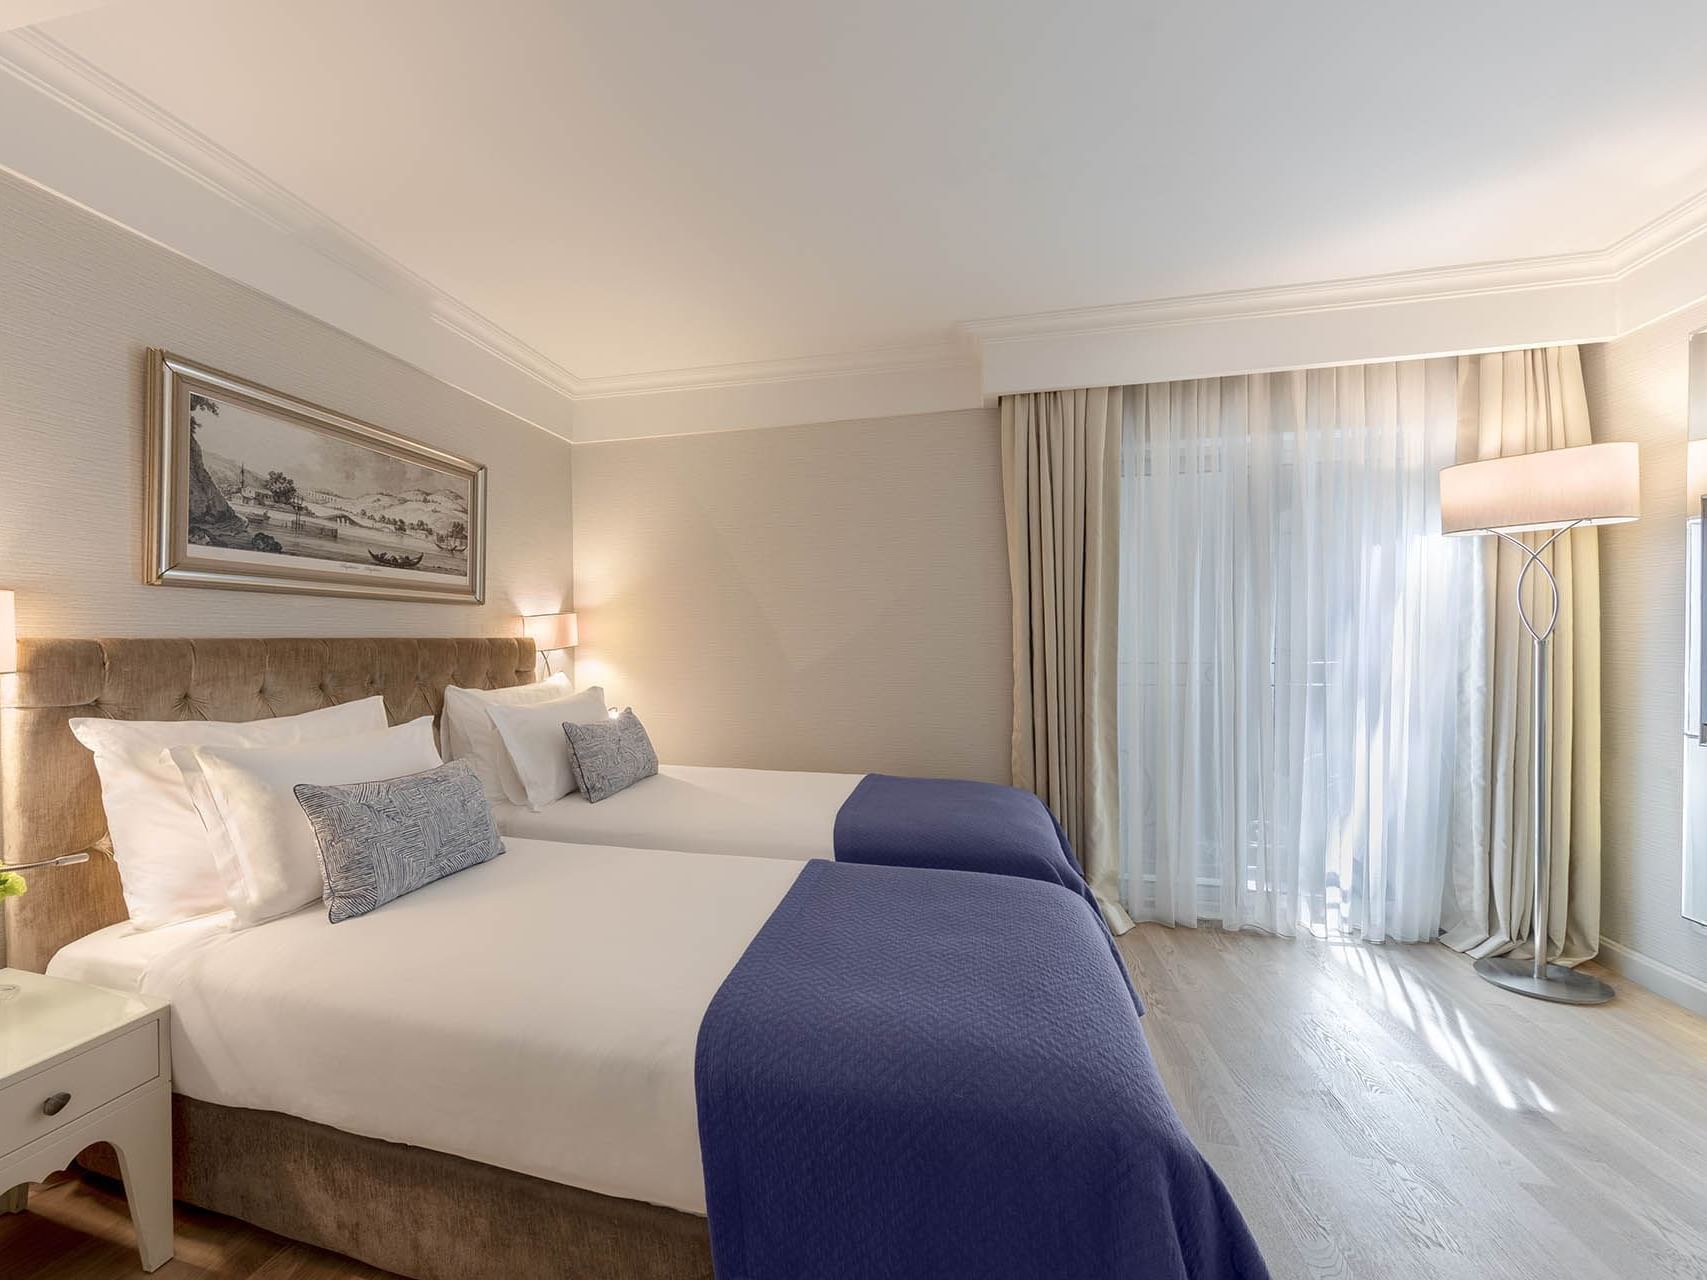 Standard Room with two beds at CVK Taksim Hotel Istanbul